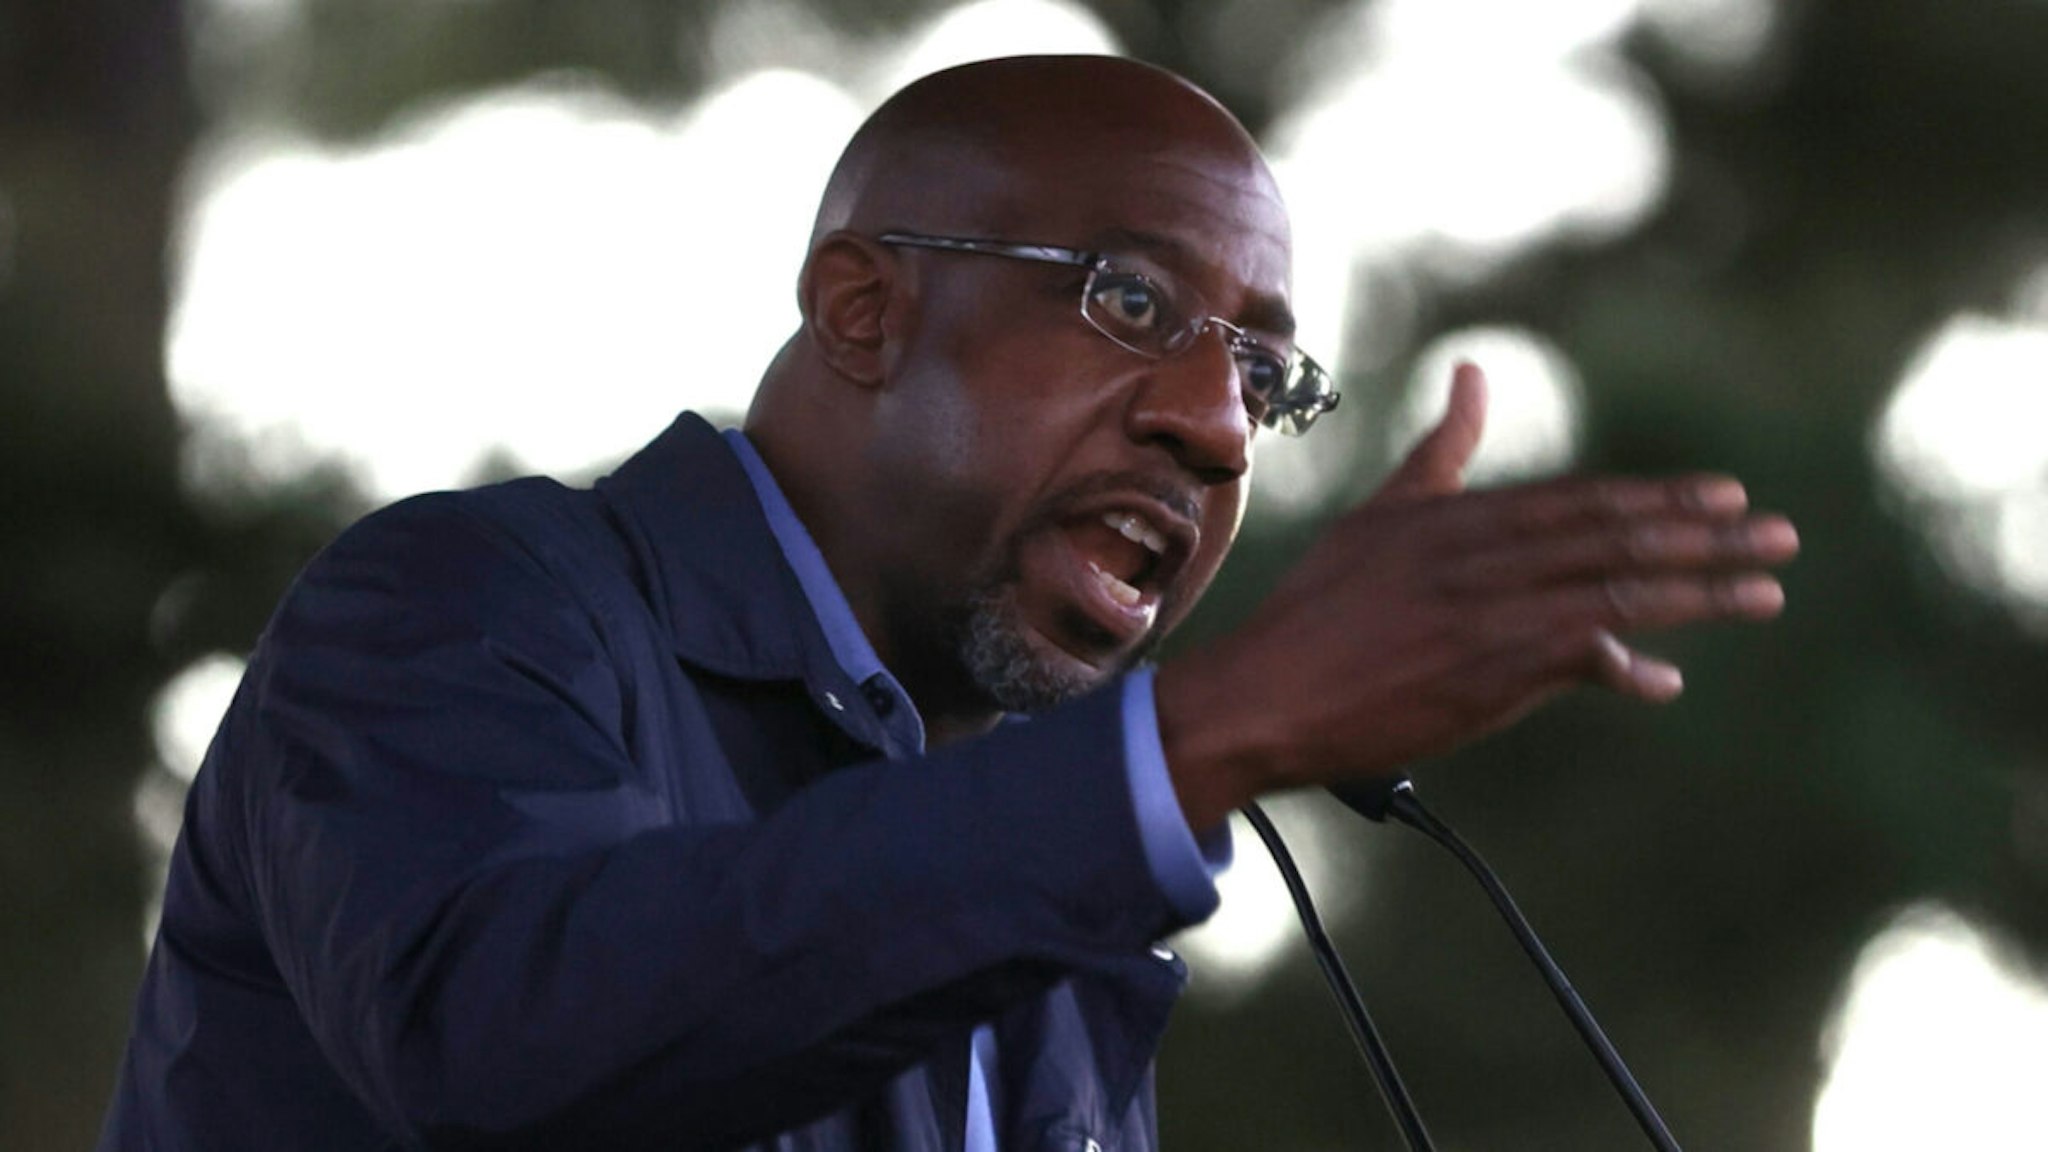 Democratic U.S. Senate candidate Rev. Raphael Warnock speaks during a "Get Out the Early Vote" drive-in campaign event on October 29, 2020 in Columbus, Georgia.